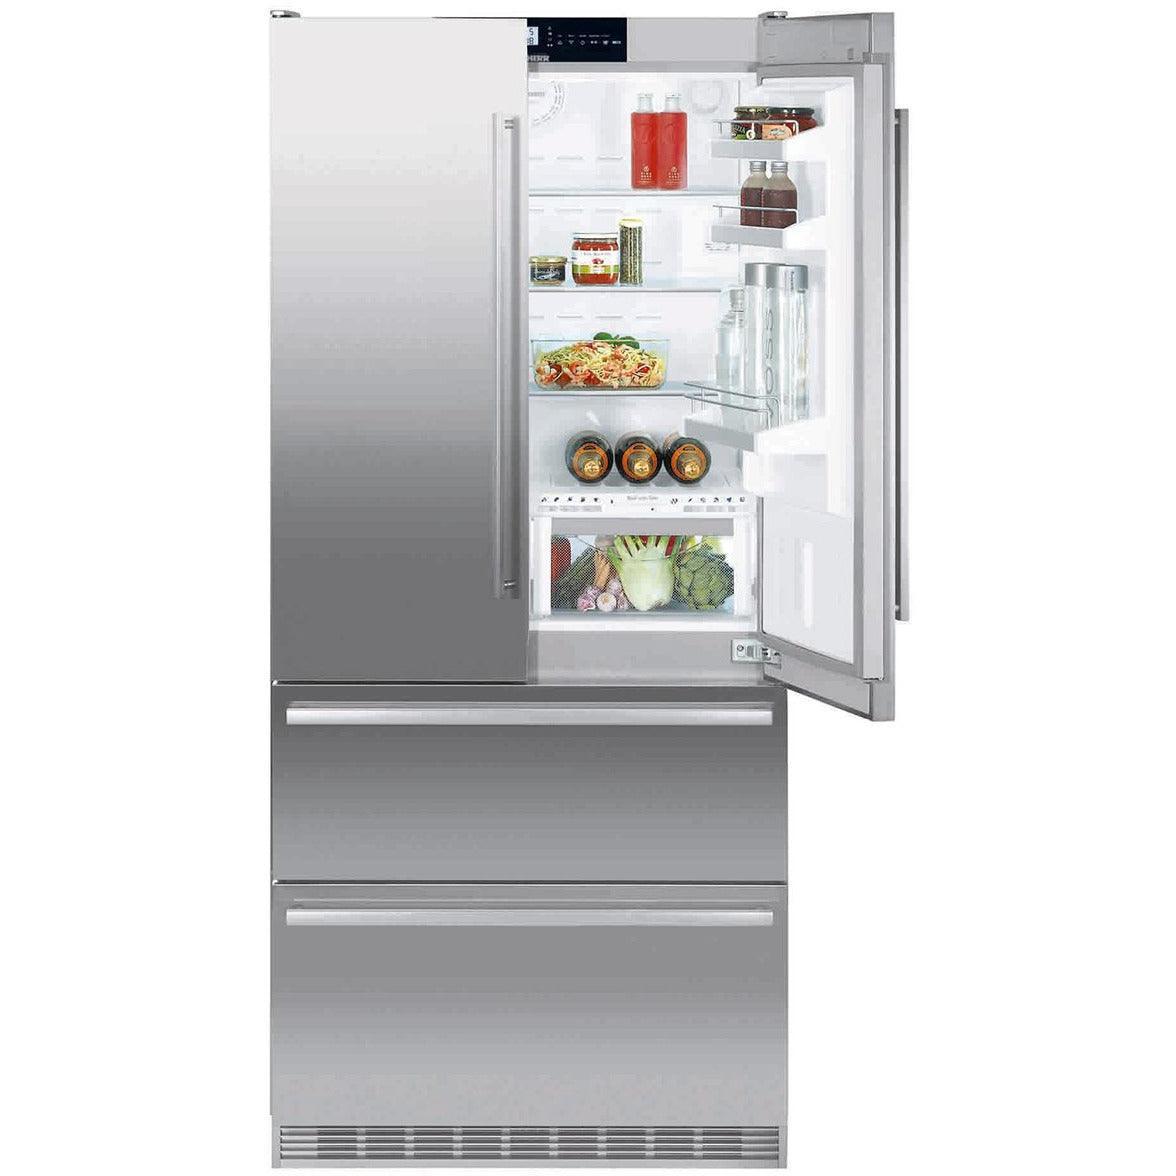 Liebherr 60/40 NoFrost Freestanding American Fridge Freezer - Stainless Steel | CBNES6256 from DID Electrical - guaranteed Irish, guaranteed quality service. (6890759979196)